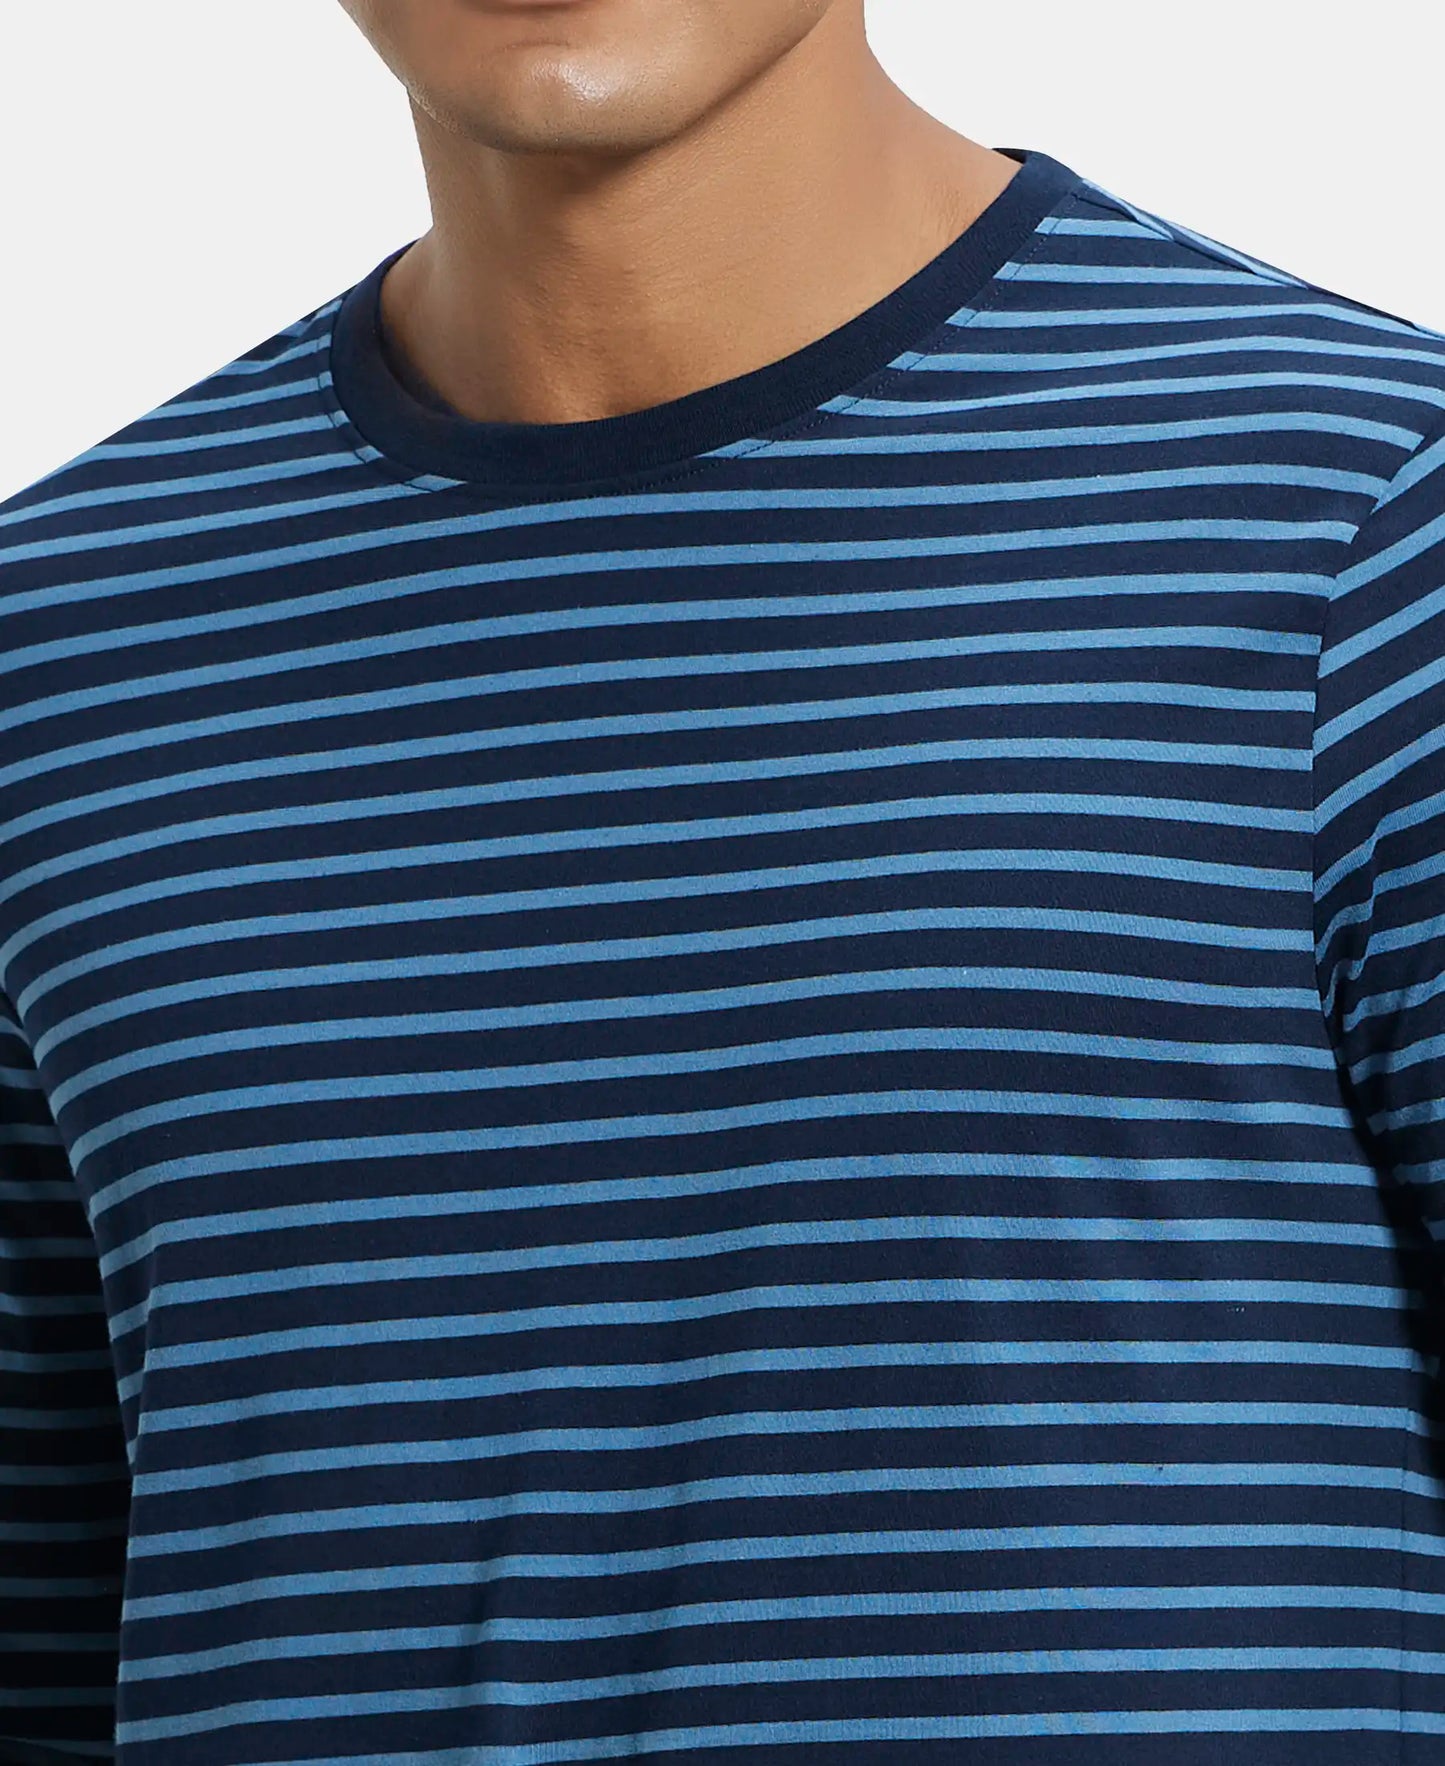 Super Combed Cotton Rich Striped Round Neck Full Sleeve T-Shirt - Navy Seaport Teal-6